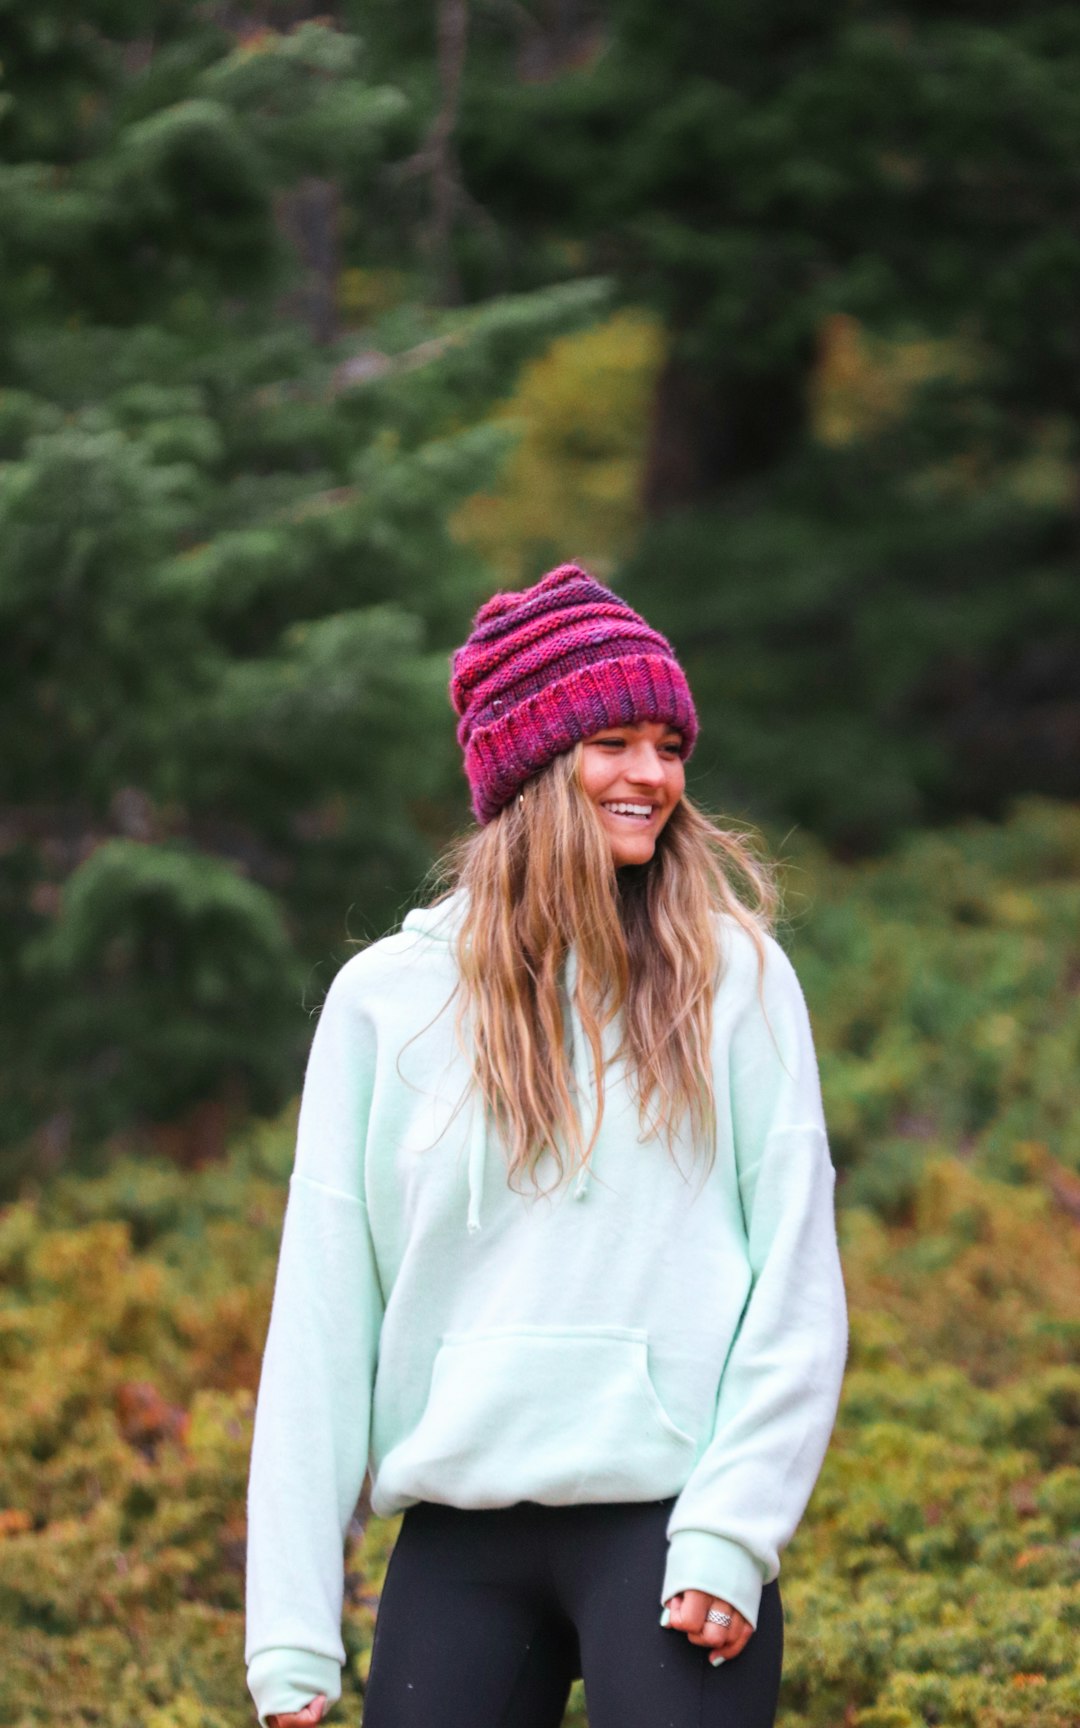 woman in white long sleeve shirt and red knit cap standing near green trees during daytime